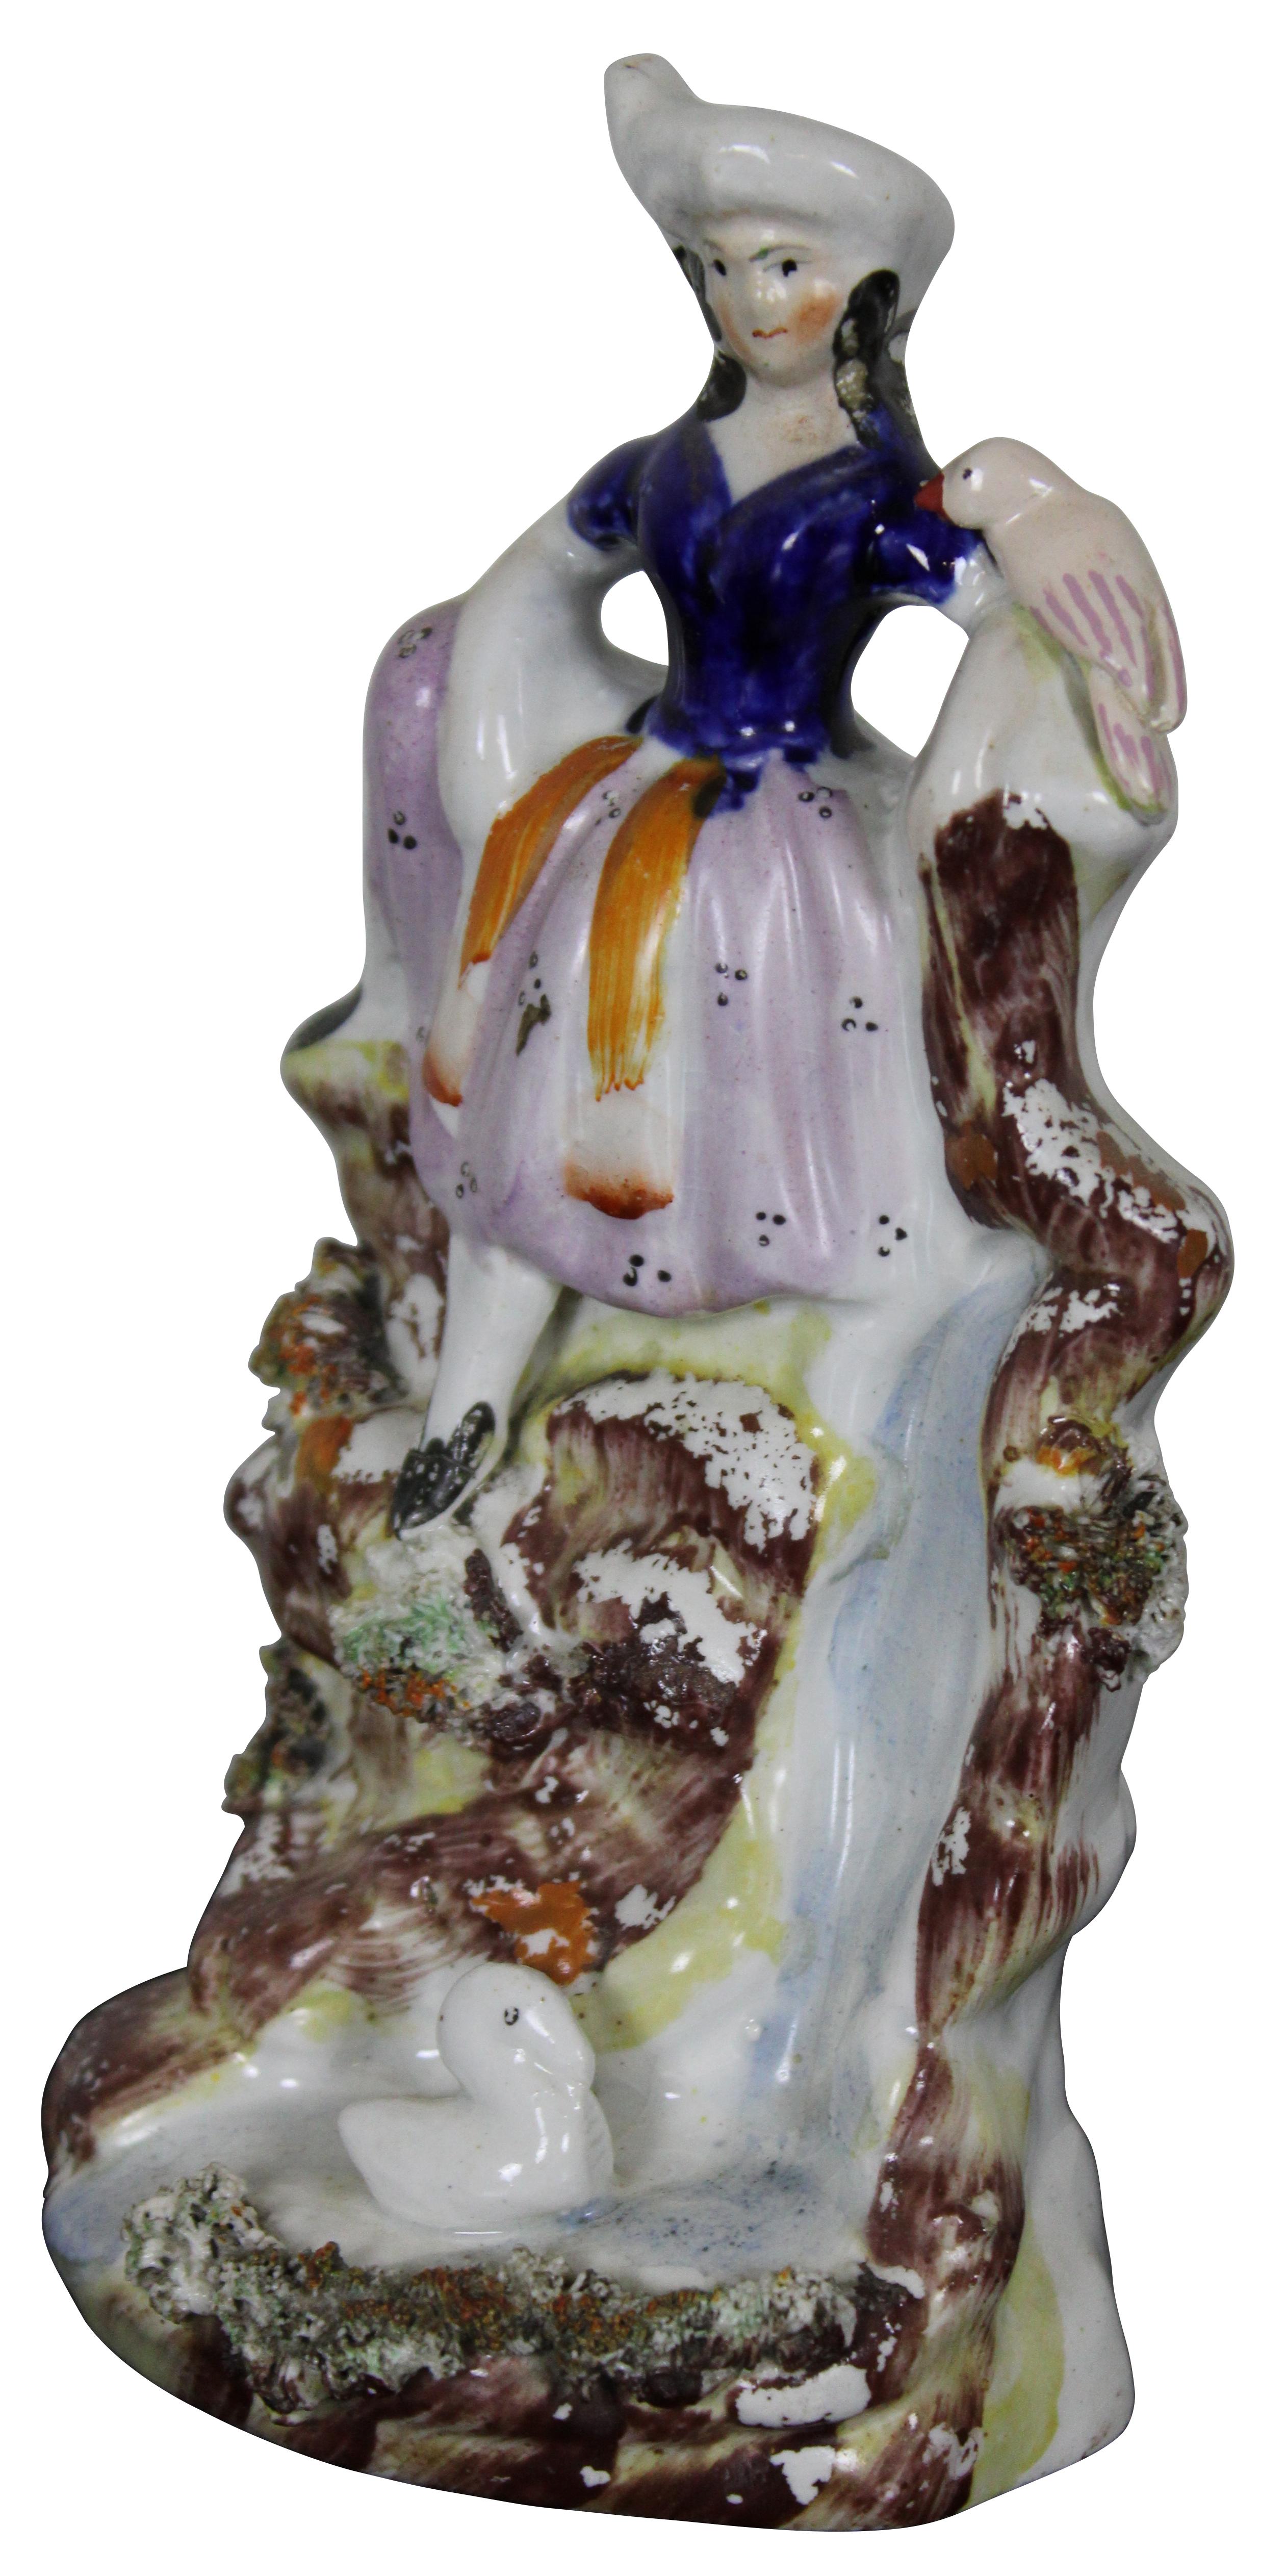 Antique 19th century staffordshire porcelain figure showing a young woman seated on the rocks above a waterfall with two birds.